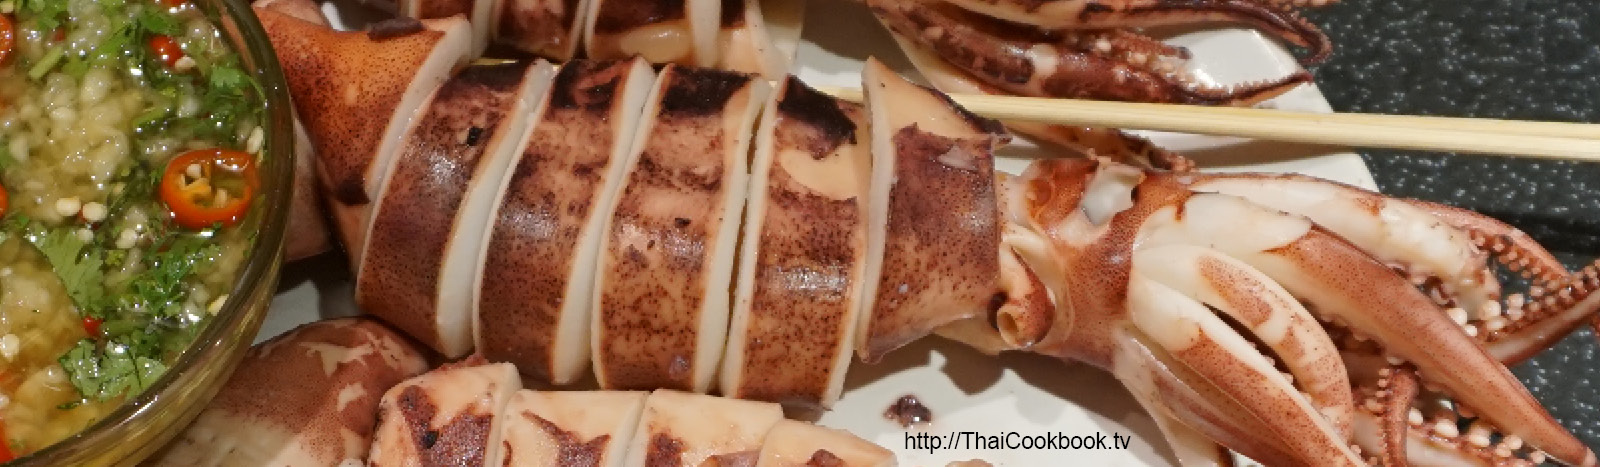 Authentic Thai recipe for Spicy Grilled Squid with Pork Filling